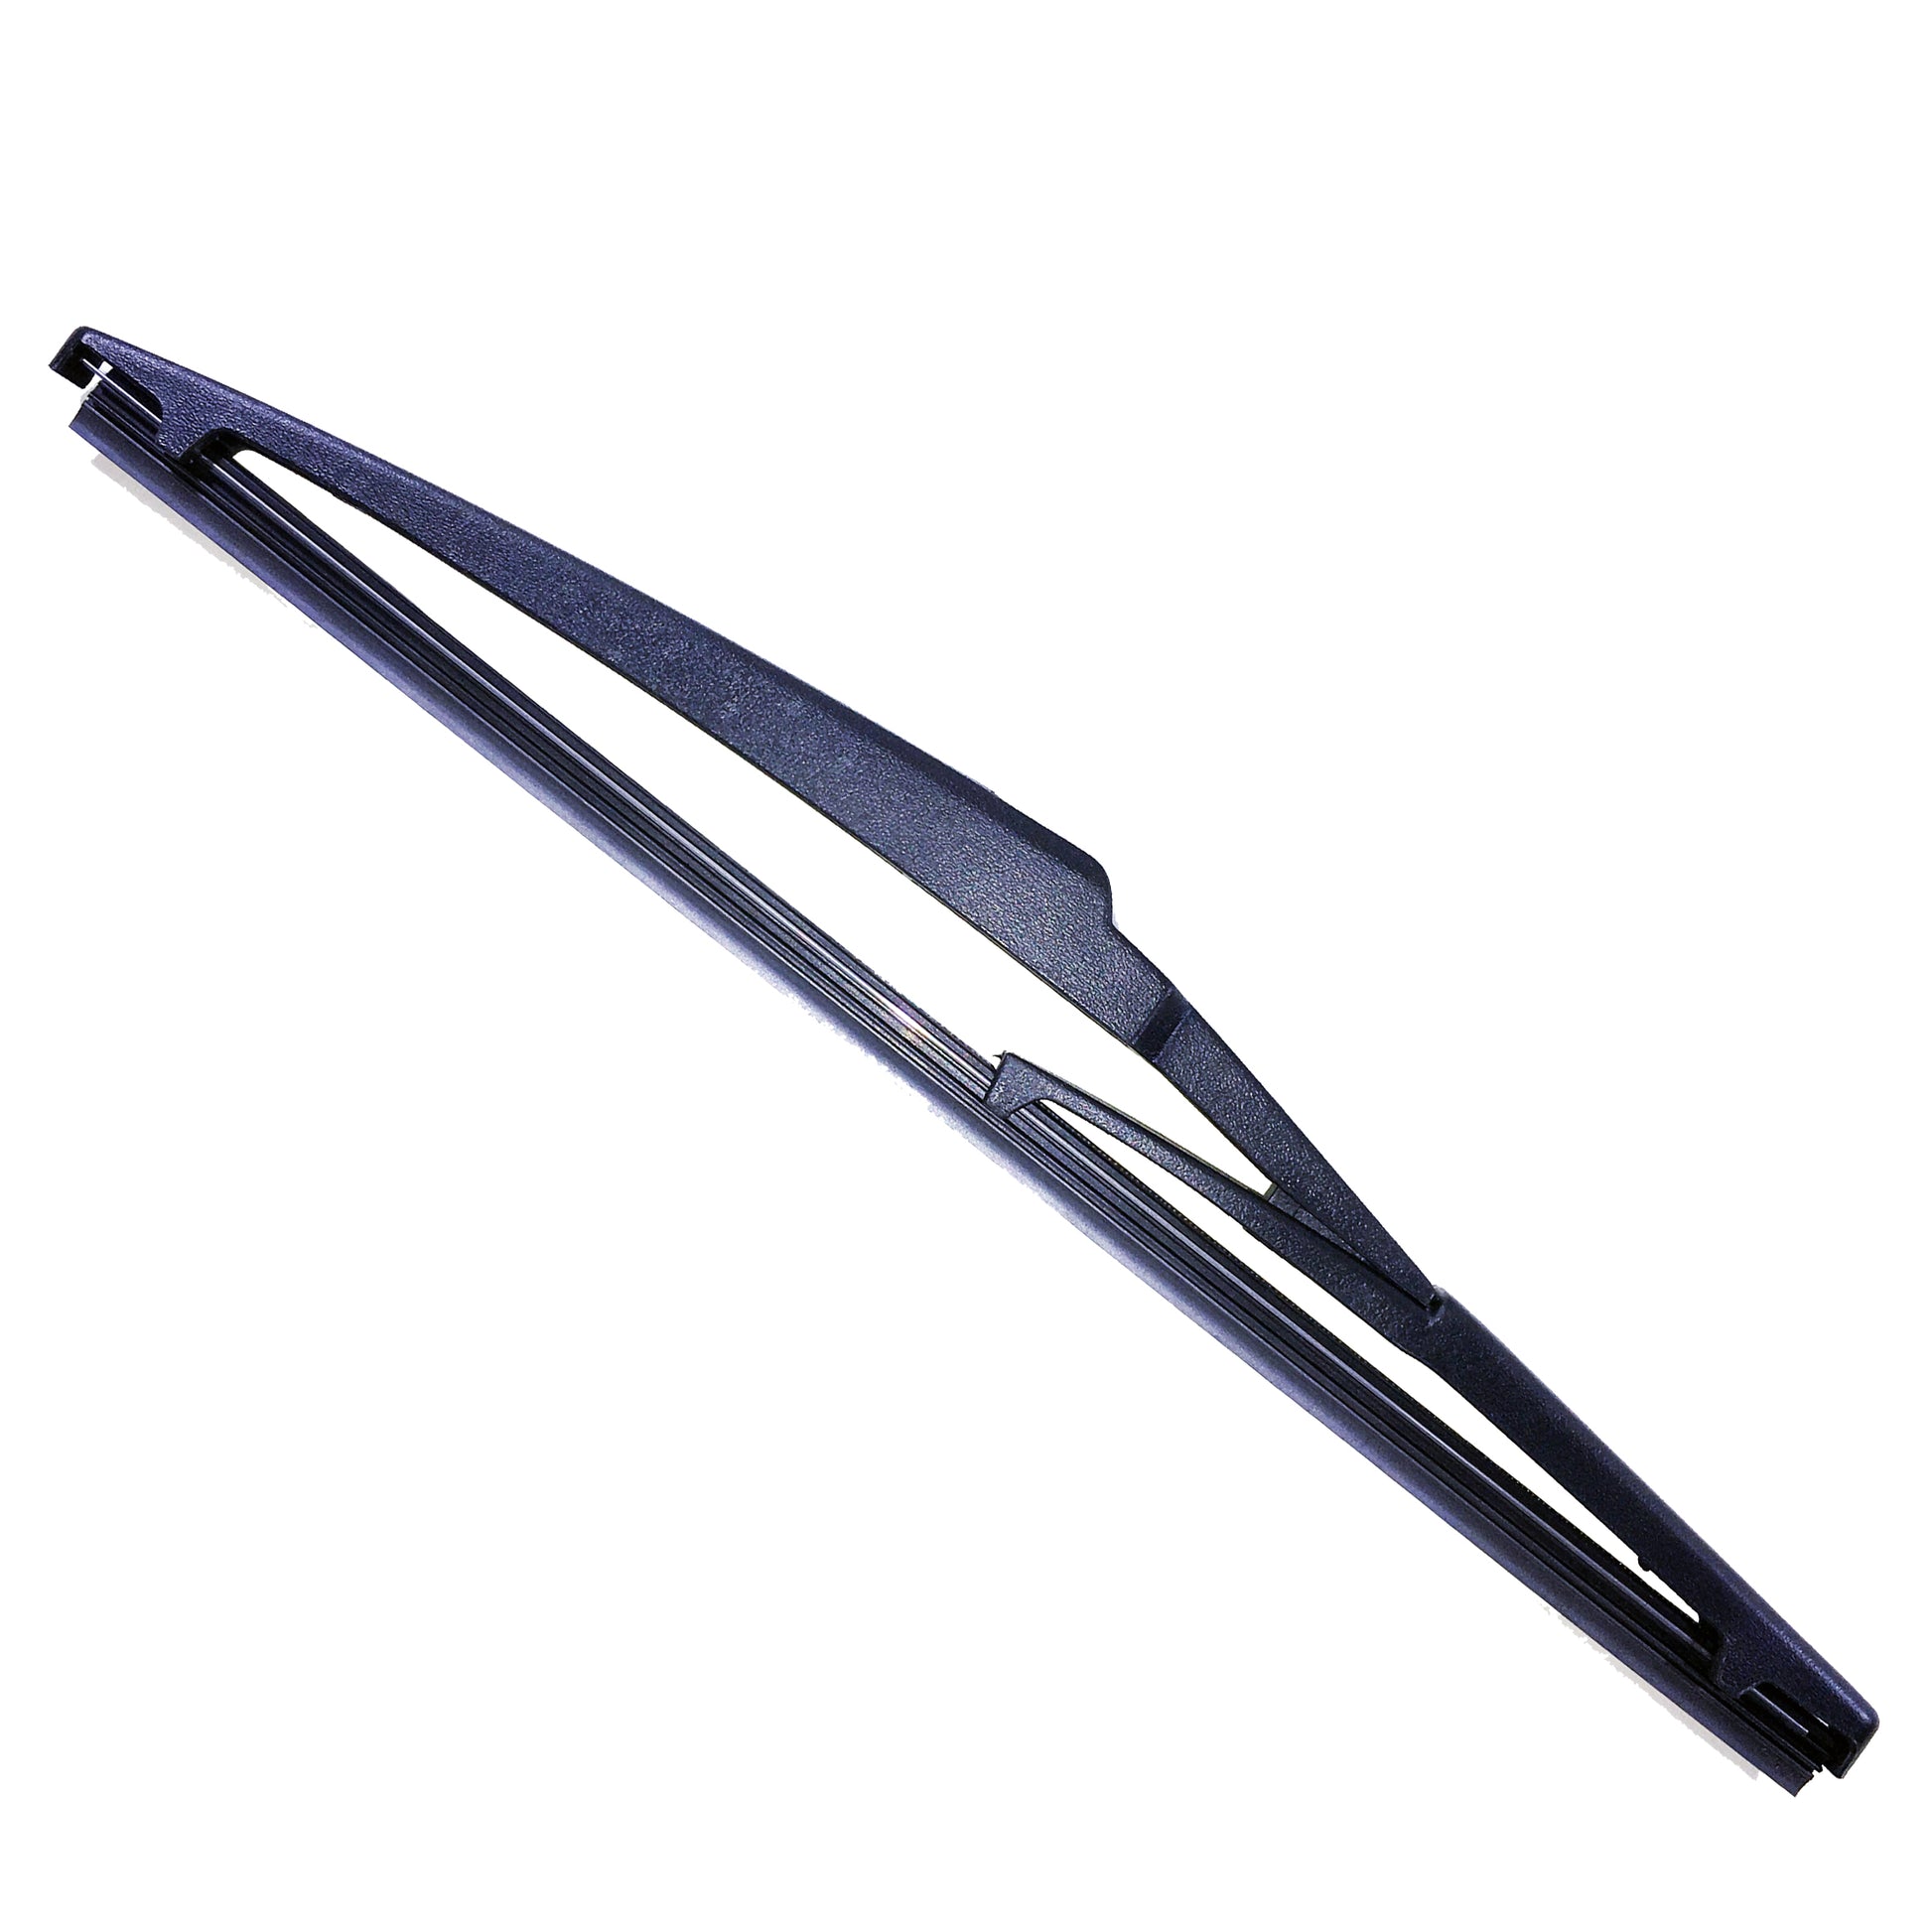 LEXUS RX SUV May 2003 to May 2005Rear Wiper Blade 